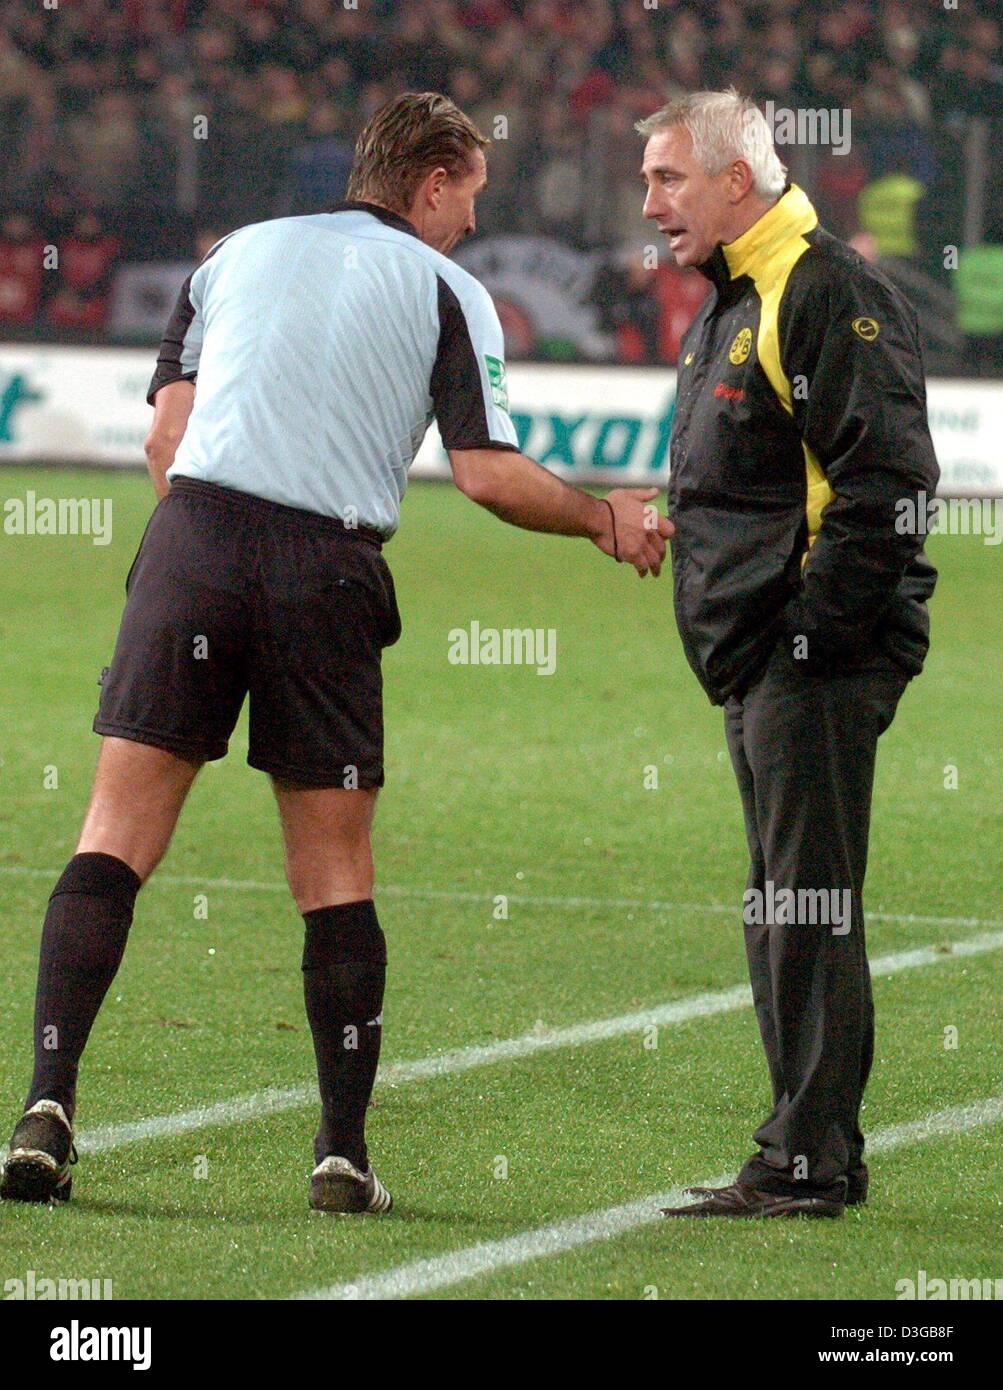 dpa) - Dortmund's coach Bert van Marwijk (R) is cautioned by referee  Franz-Xaver Wack during the German Cup soccer match between Hannover 96 and  Borussia Dortmund in Hanover, Germany, 9 November 2004.